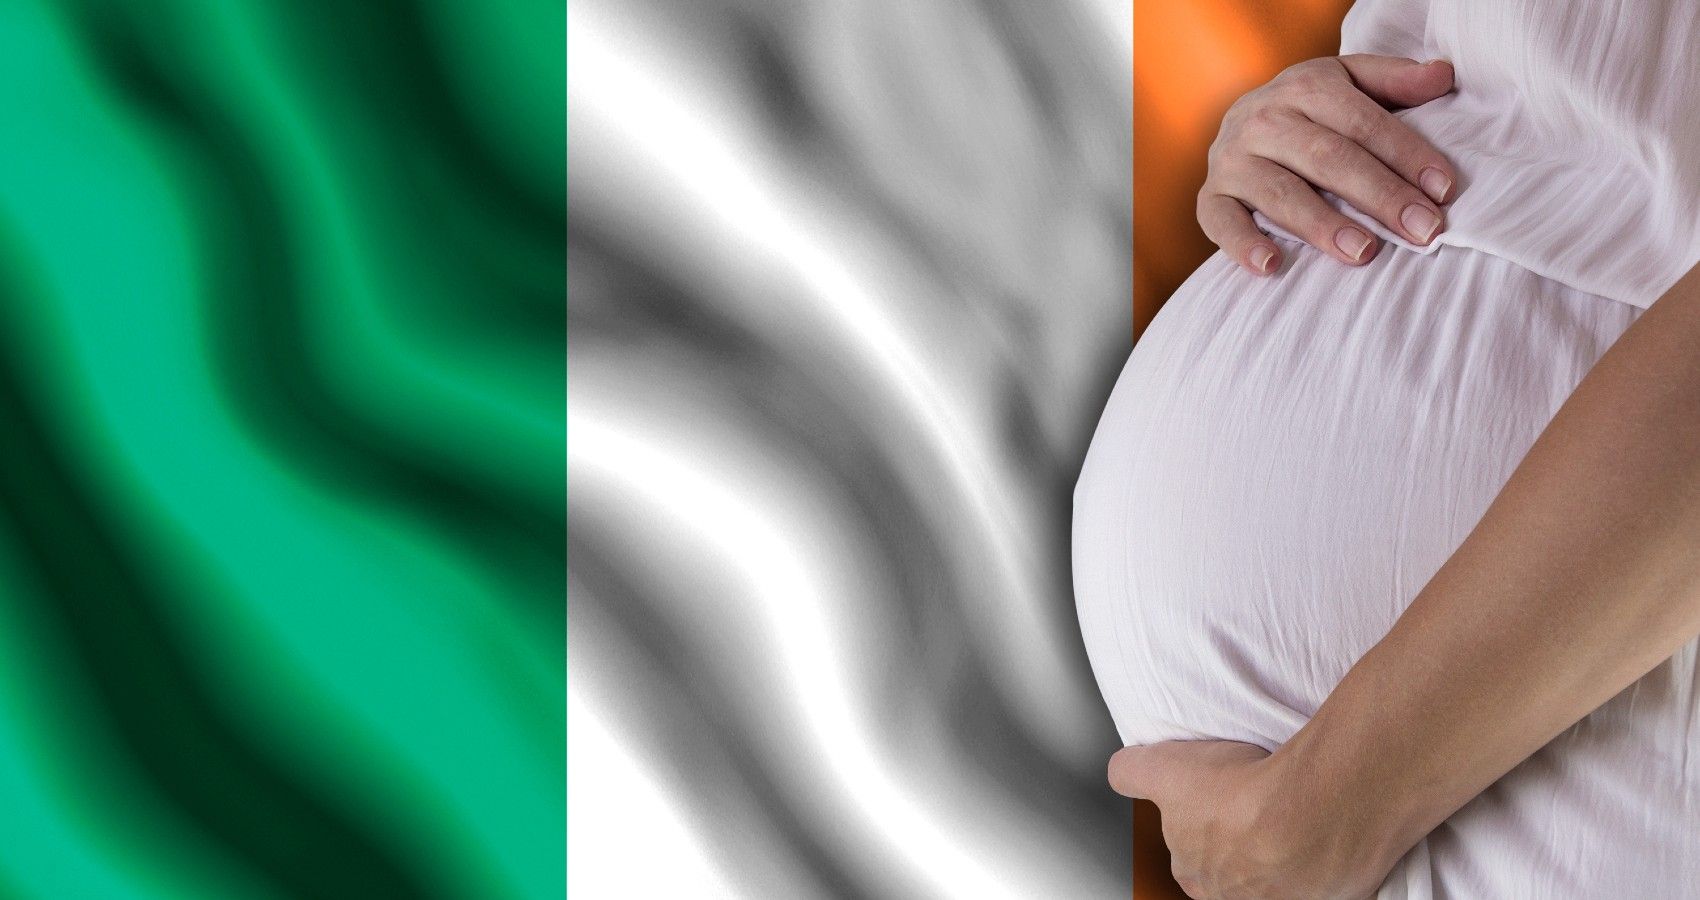 Ireland One Of Top Countries For Prenatal Alcohol Exposure